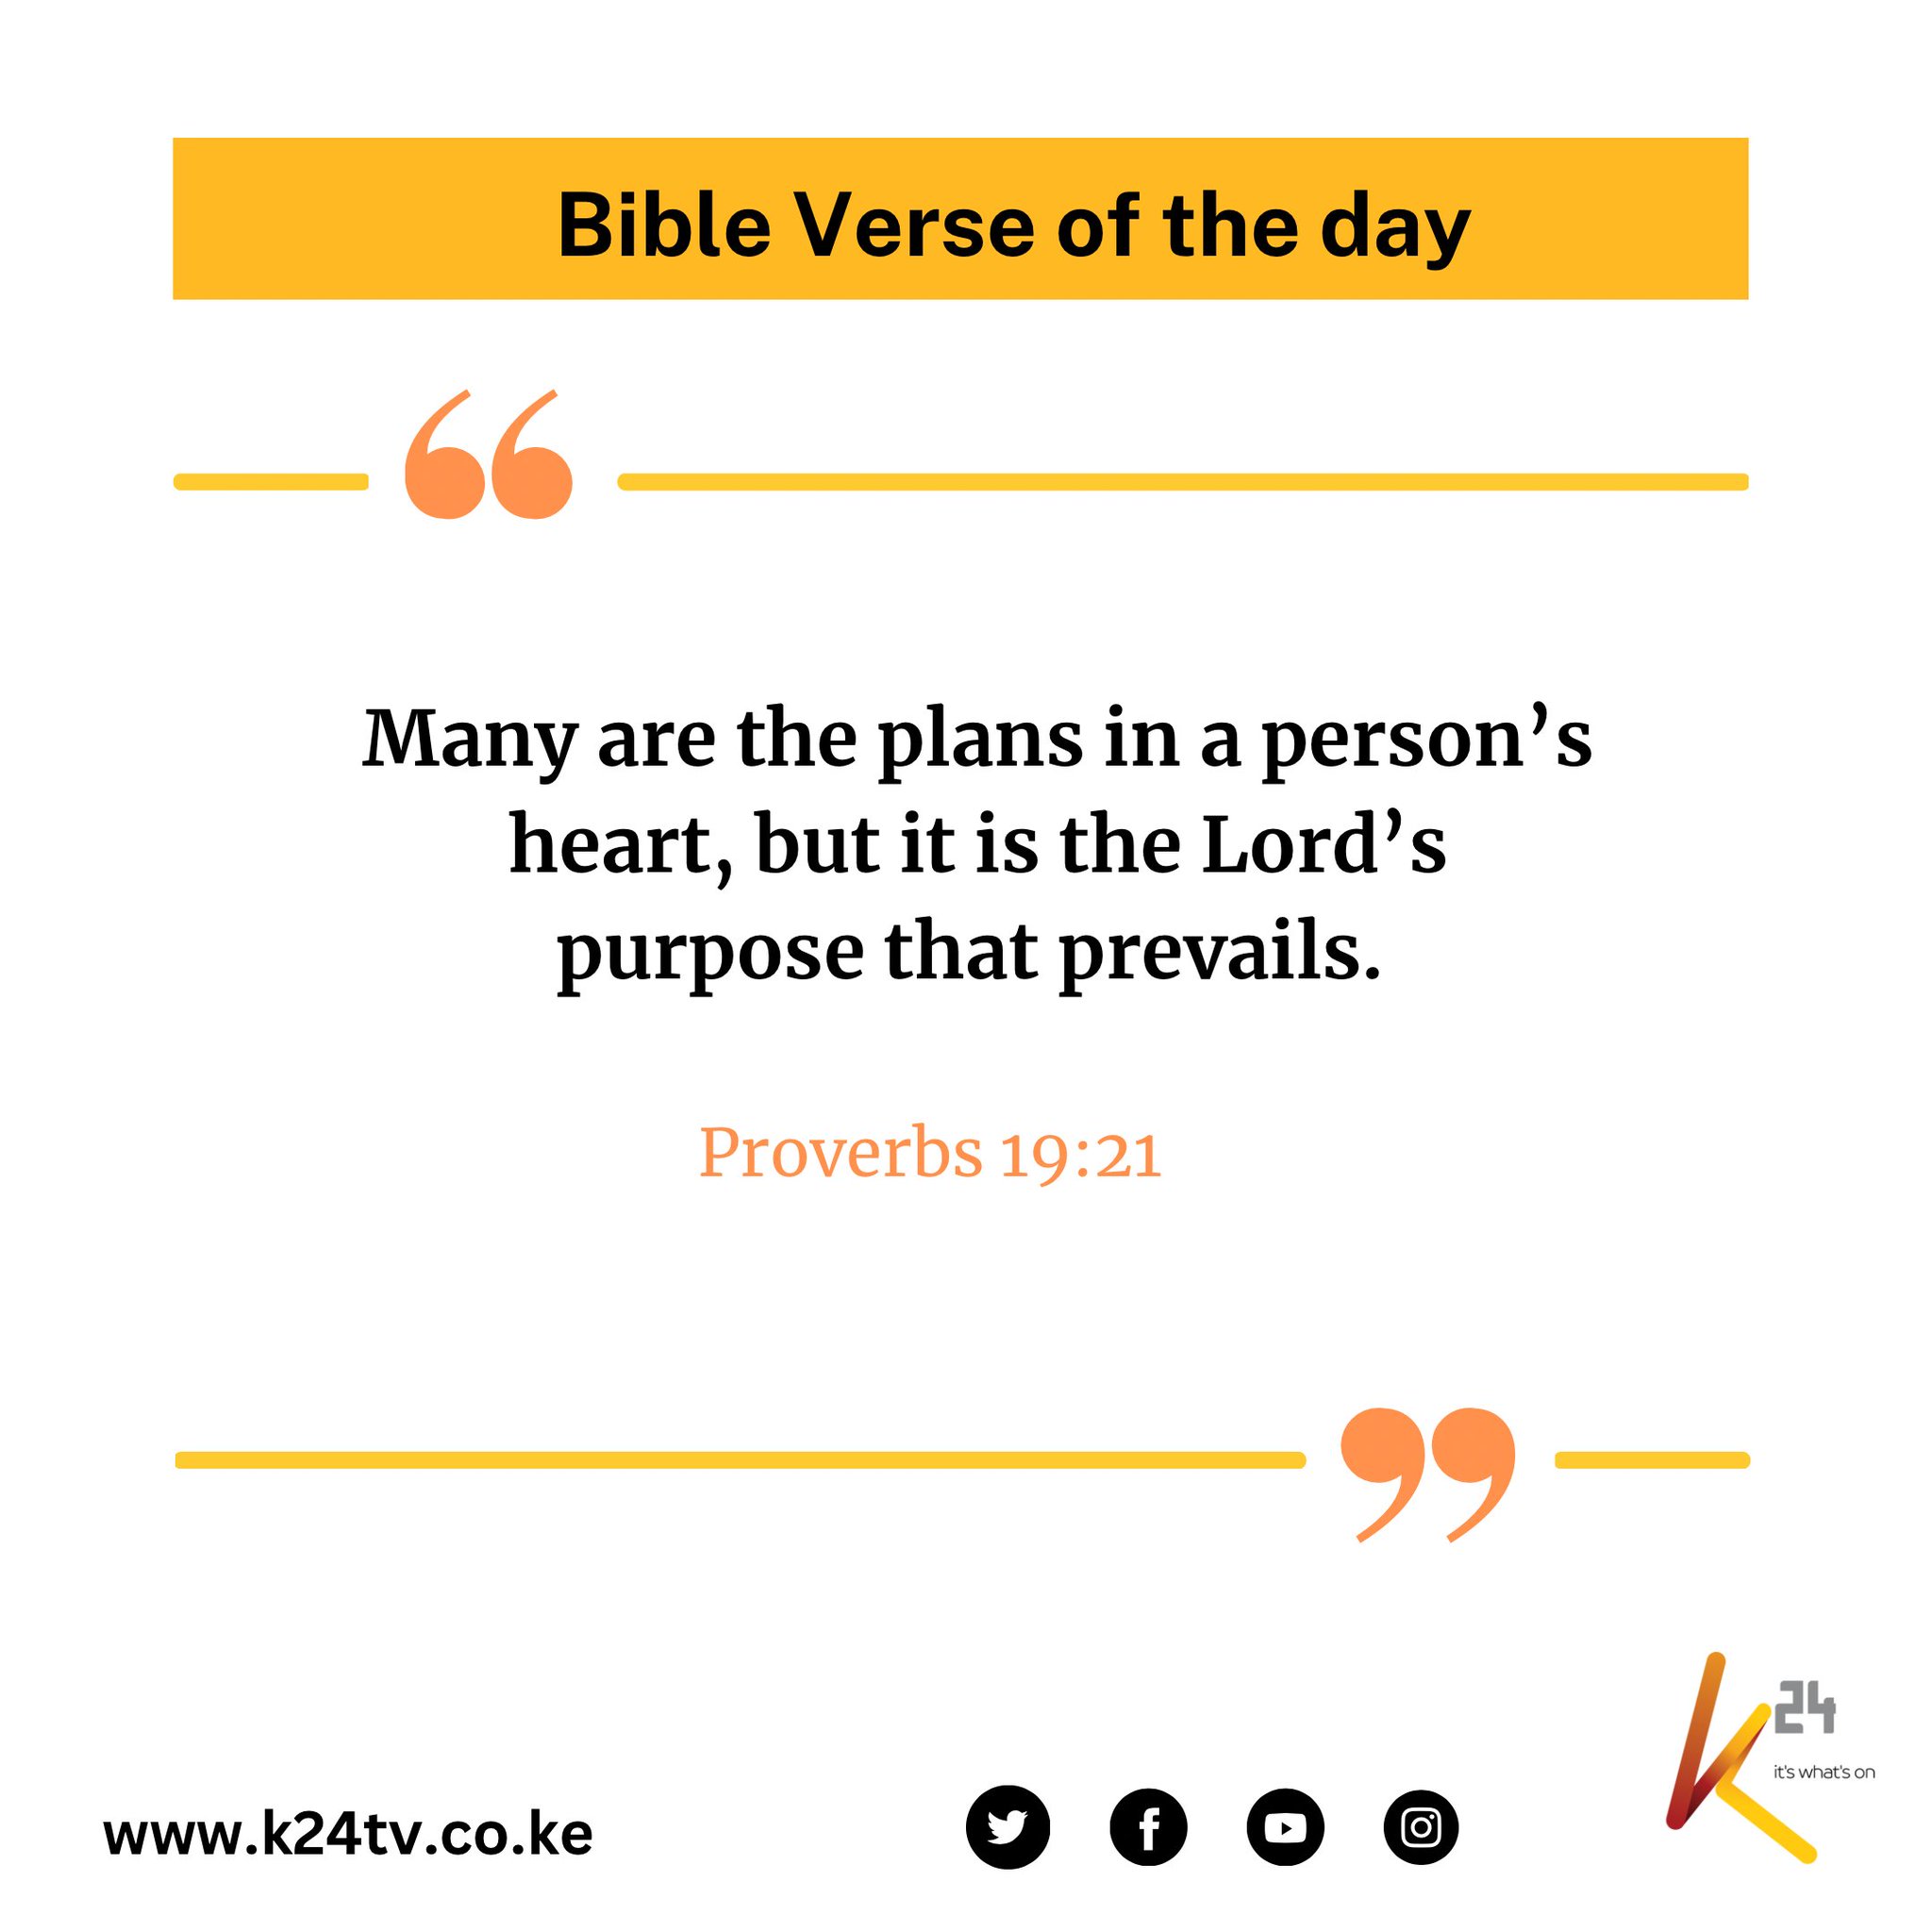 Bible Verse of the day 66 Many are the plans in a person's heart, but it is the Lord' s purpose that prevails Proverbs 19.21 24 Lnhid WWW.k24tv.co.ke